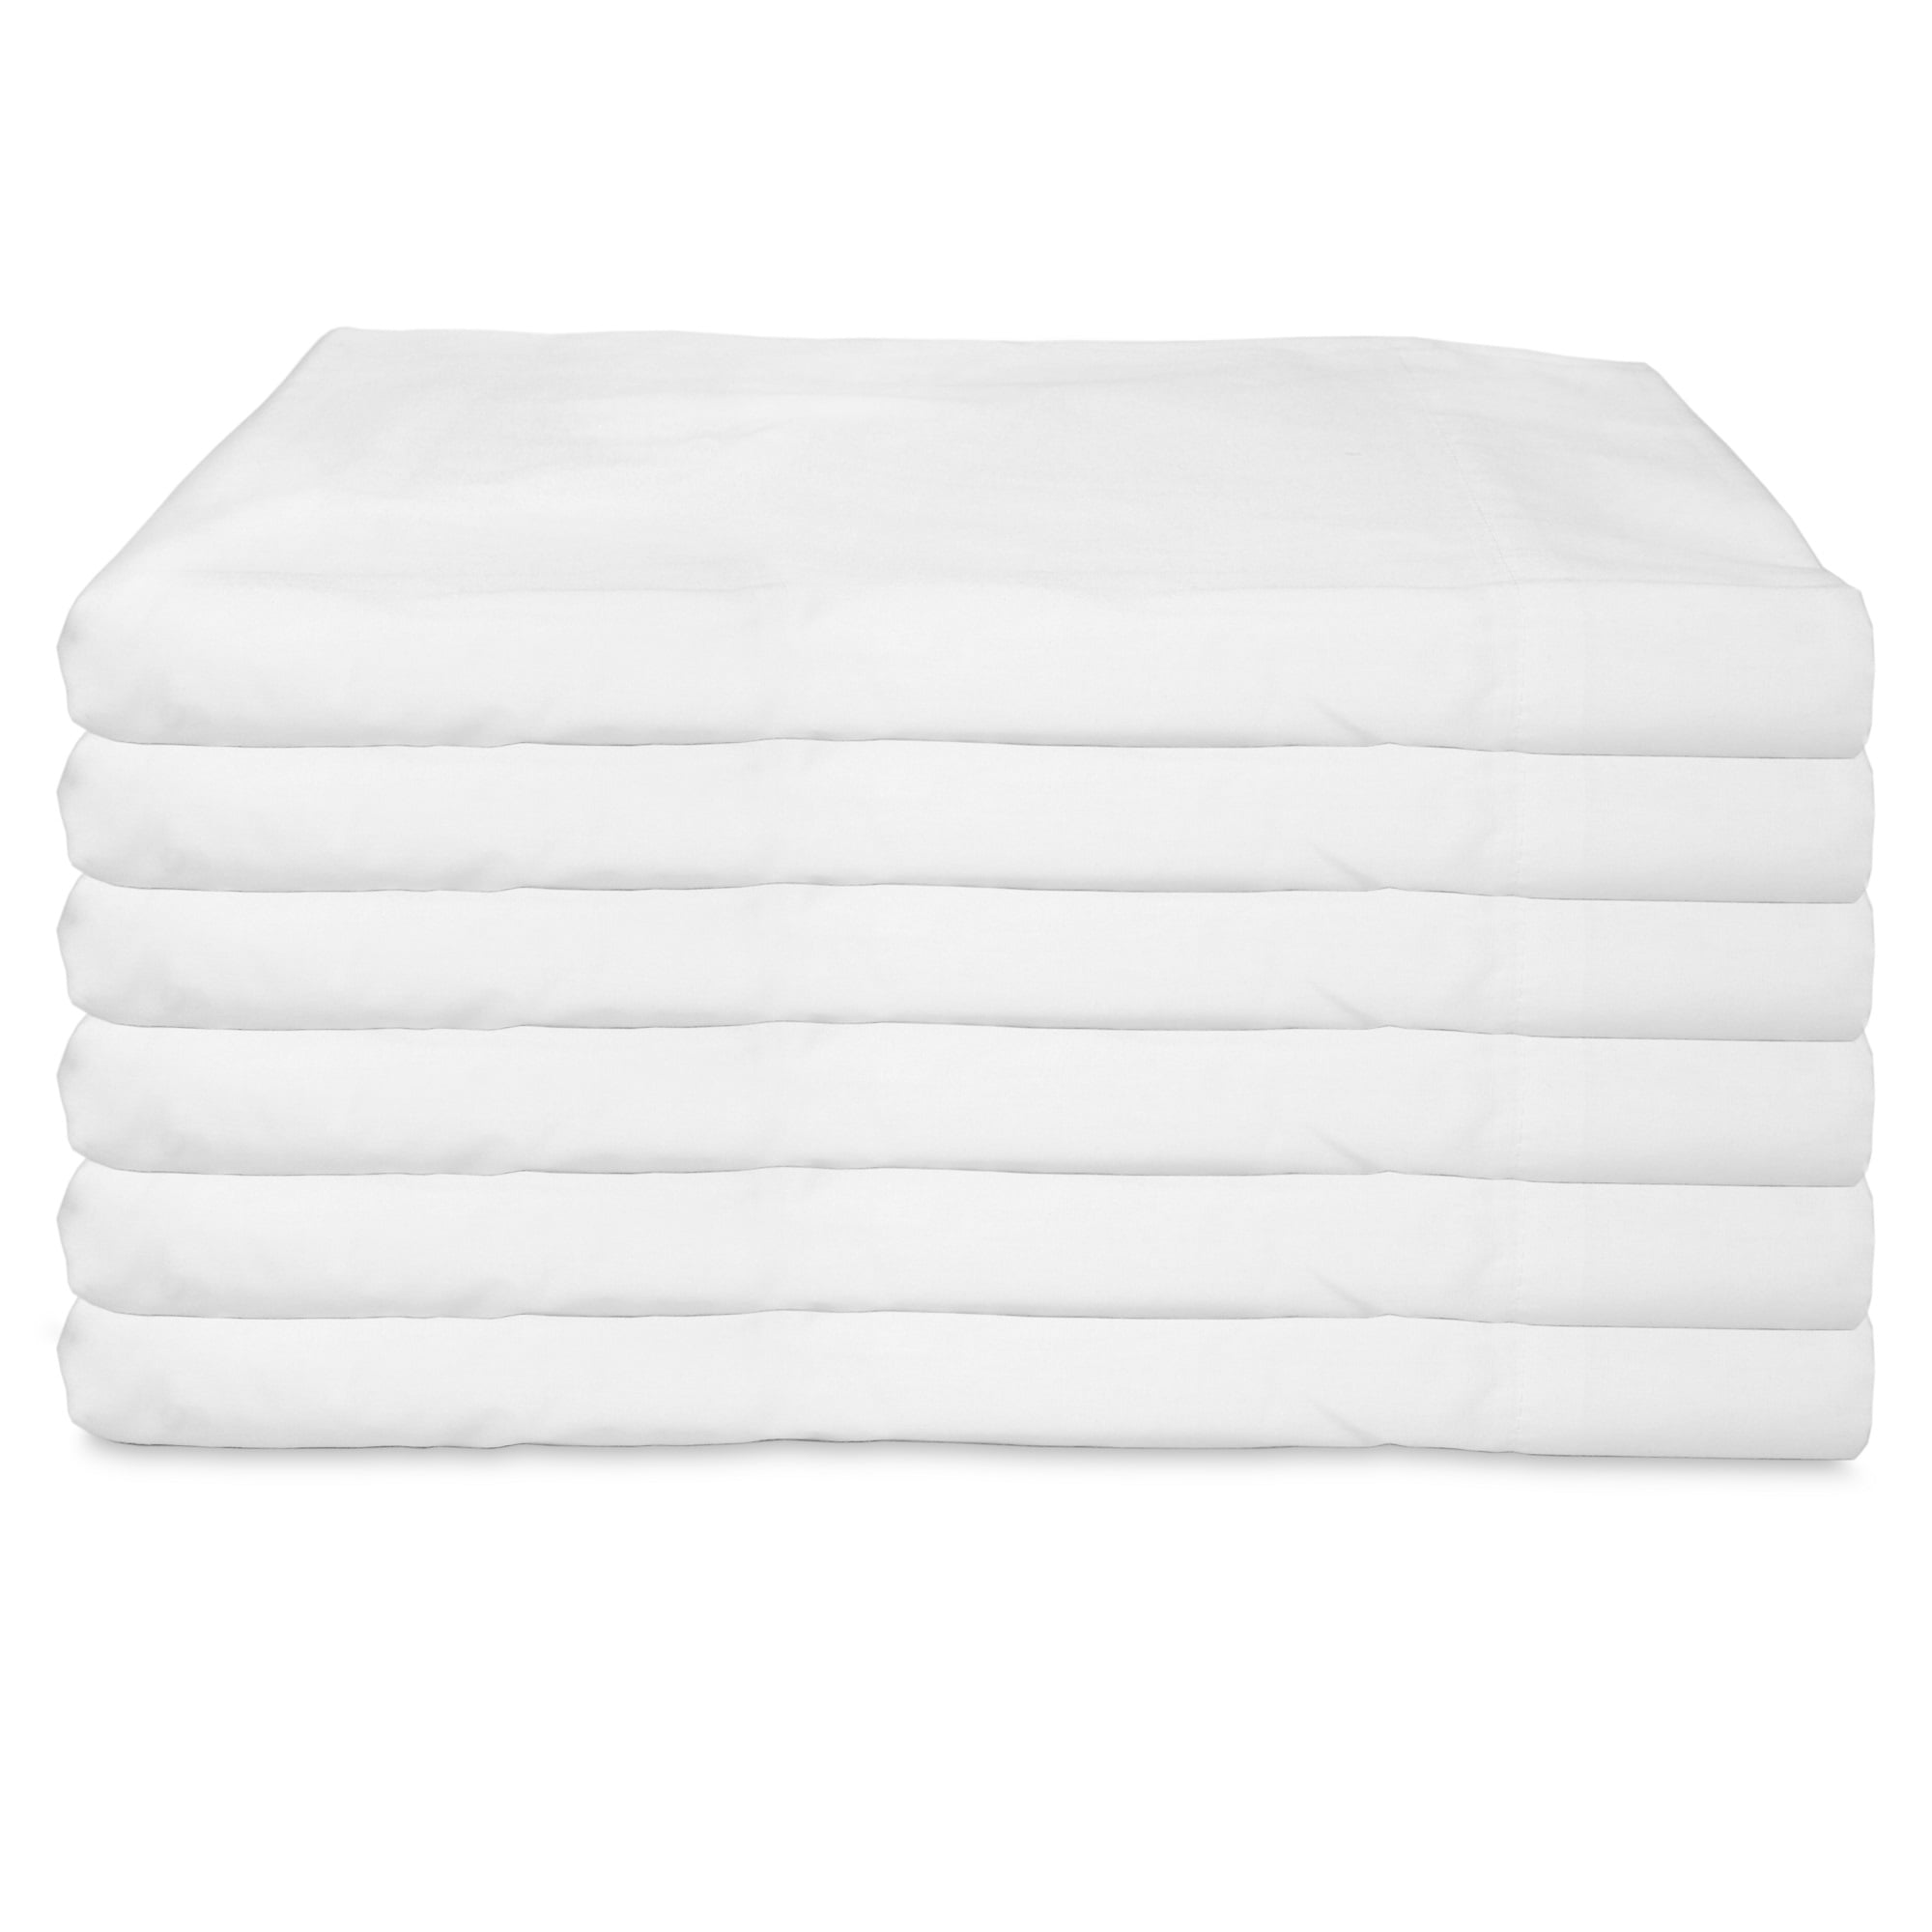 Arkwright Bulk Flat Bed Sheets - Soft Poly Cotton Sheet for Home - Full  Size - (6 Pack) White